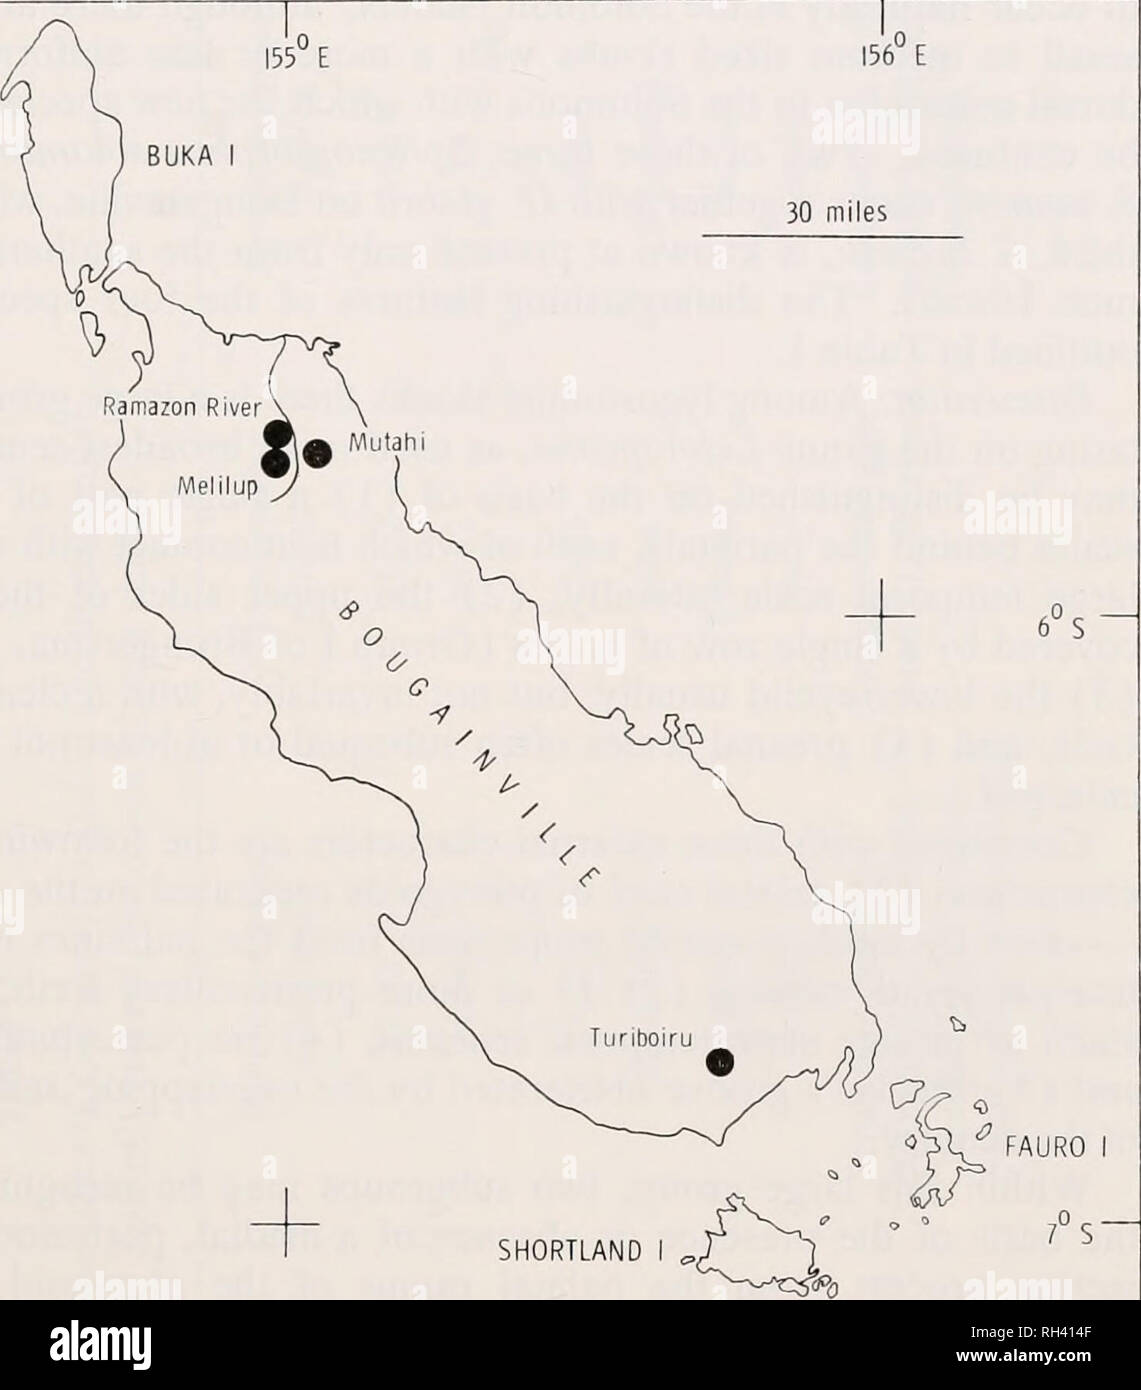 . Breviora. 1968 NEW SKINK FROM BOUGAINVILLE •6°S 7°S 156° E 30 miles o 155 E SHORTLAND MONO I (^J&gt; 6°S. 156° E Figure 2. Bougainville and neighboring islands showing the known locali- ties from which Geomyersia glabra has been collected. The apparent rarity is not solely the result of size, as many juveniles of the small skinks are collected and the natives were offered in- centives to collect the species. (Interestingly enough the largest skink in the Mutahi-Melilup area, Sphenomorphus taylori, is as infrequently collected as is Geomyersia glabra.) Morphological Comparisons with Other Sma Stock Photo